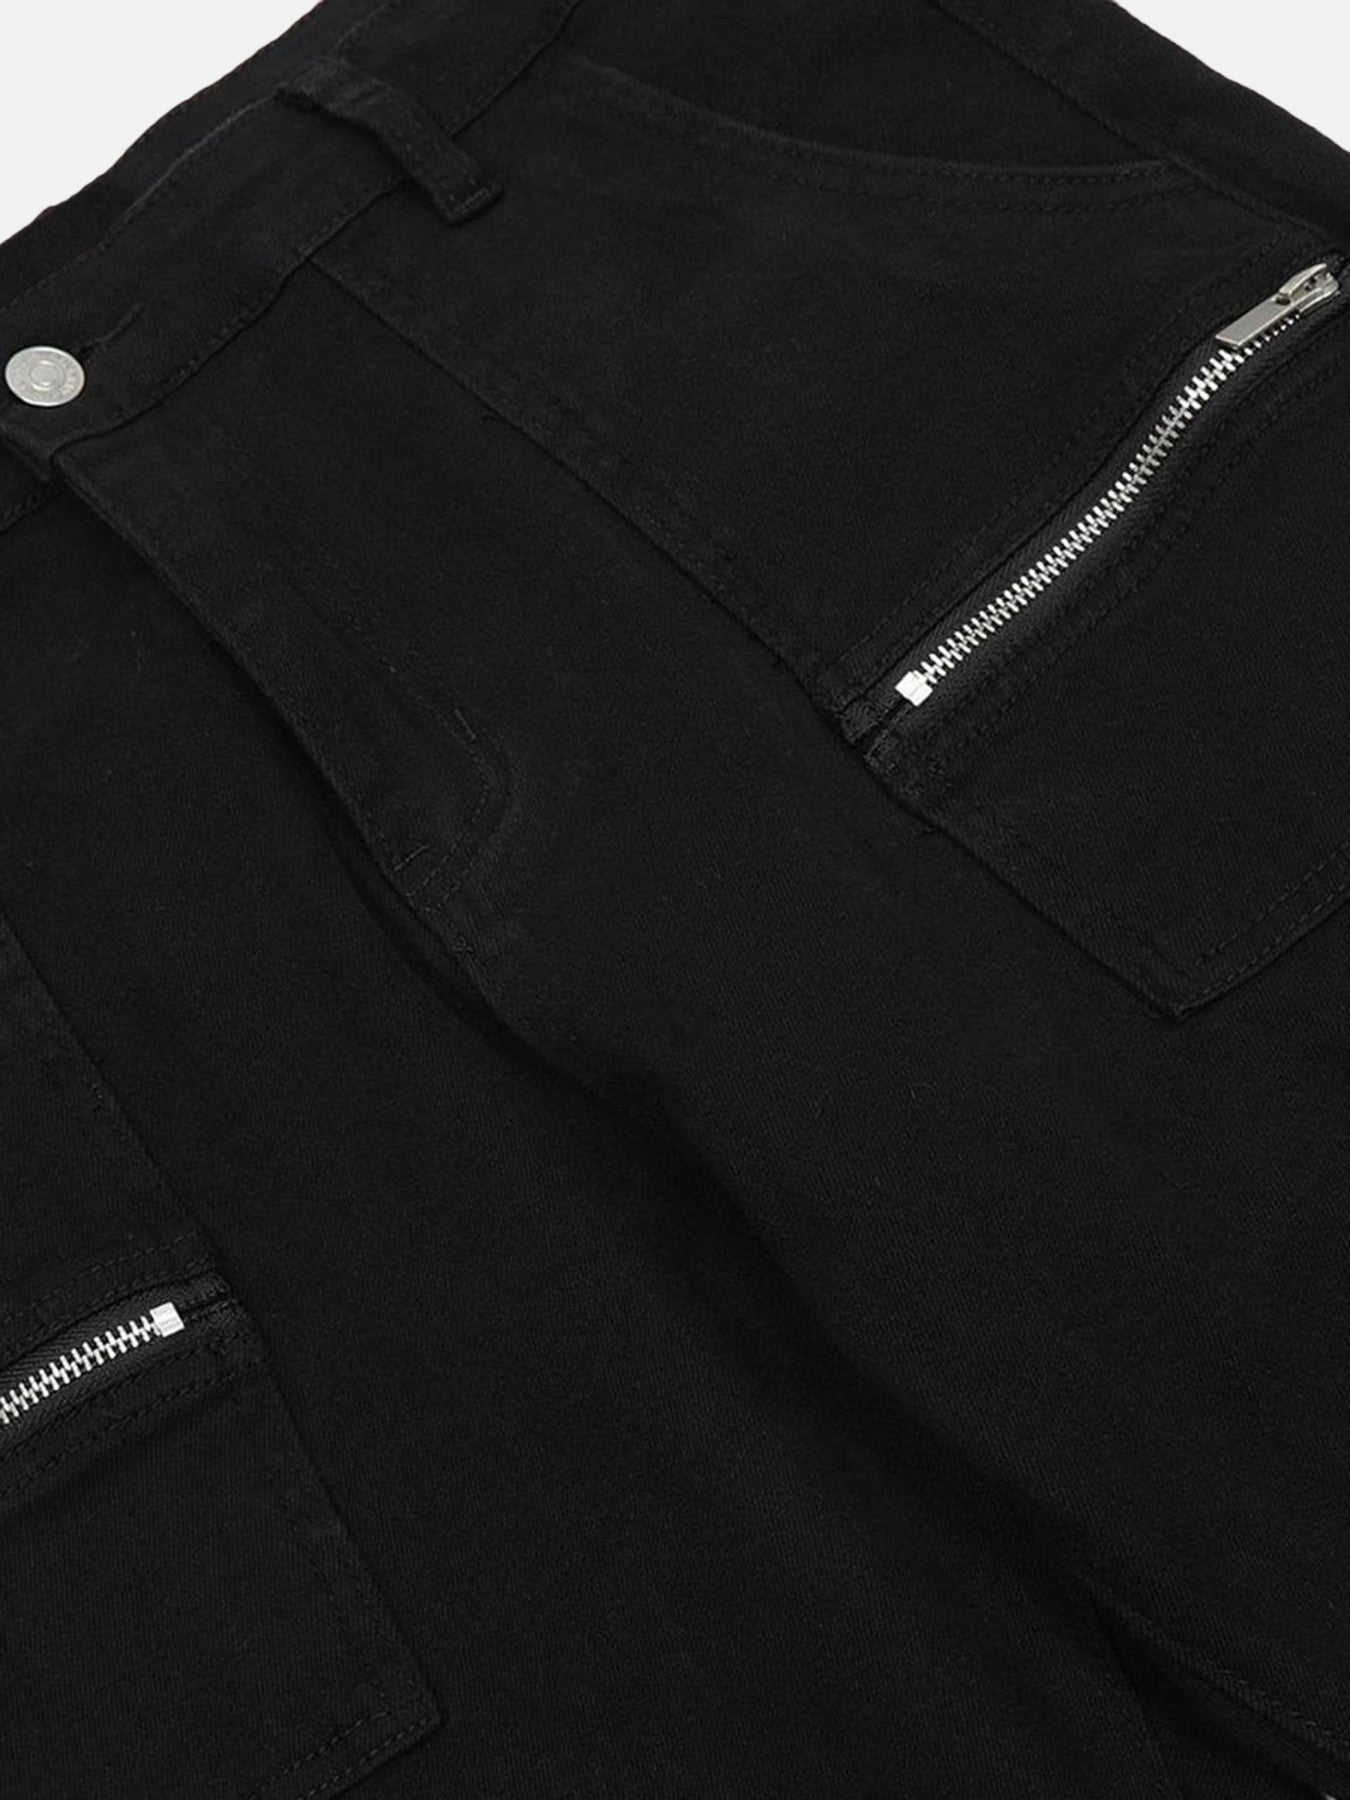 Thesupermade Work Pocket Jeans